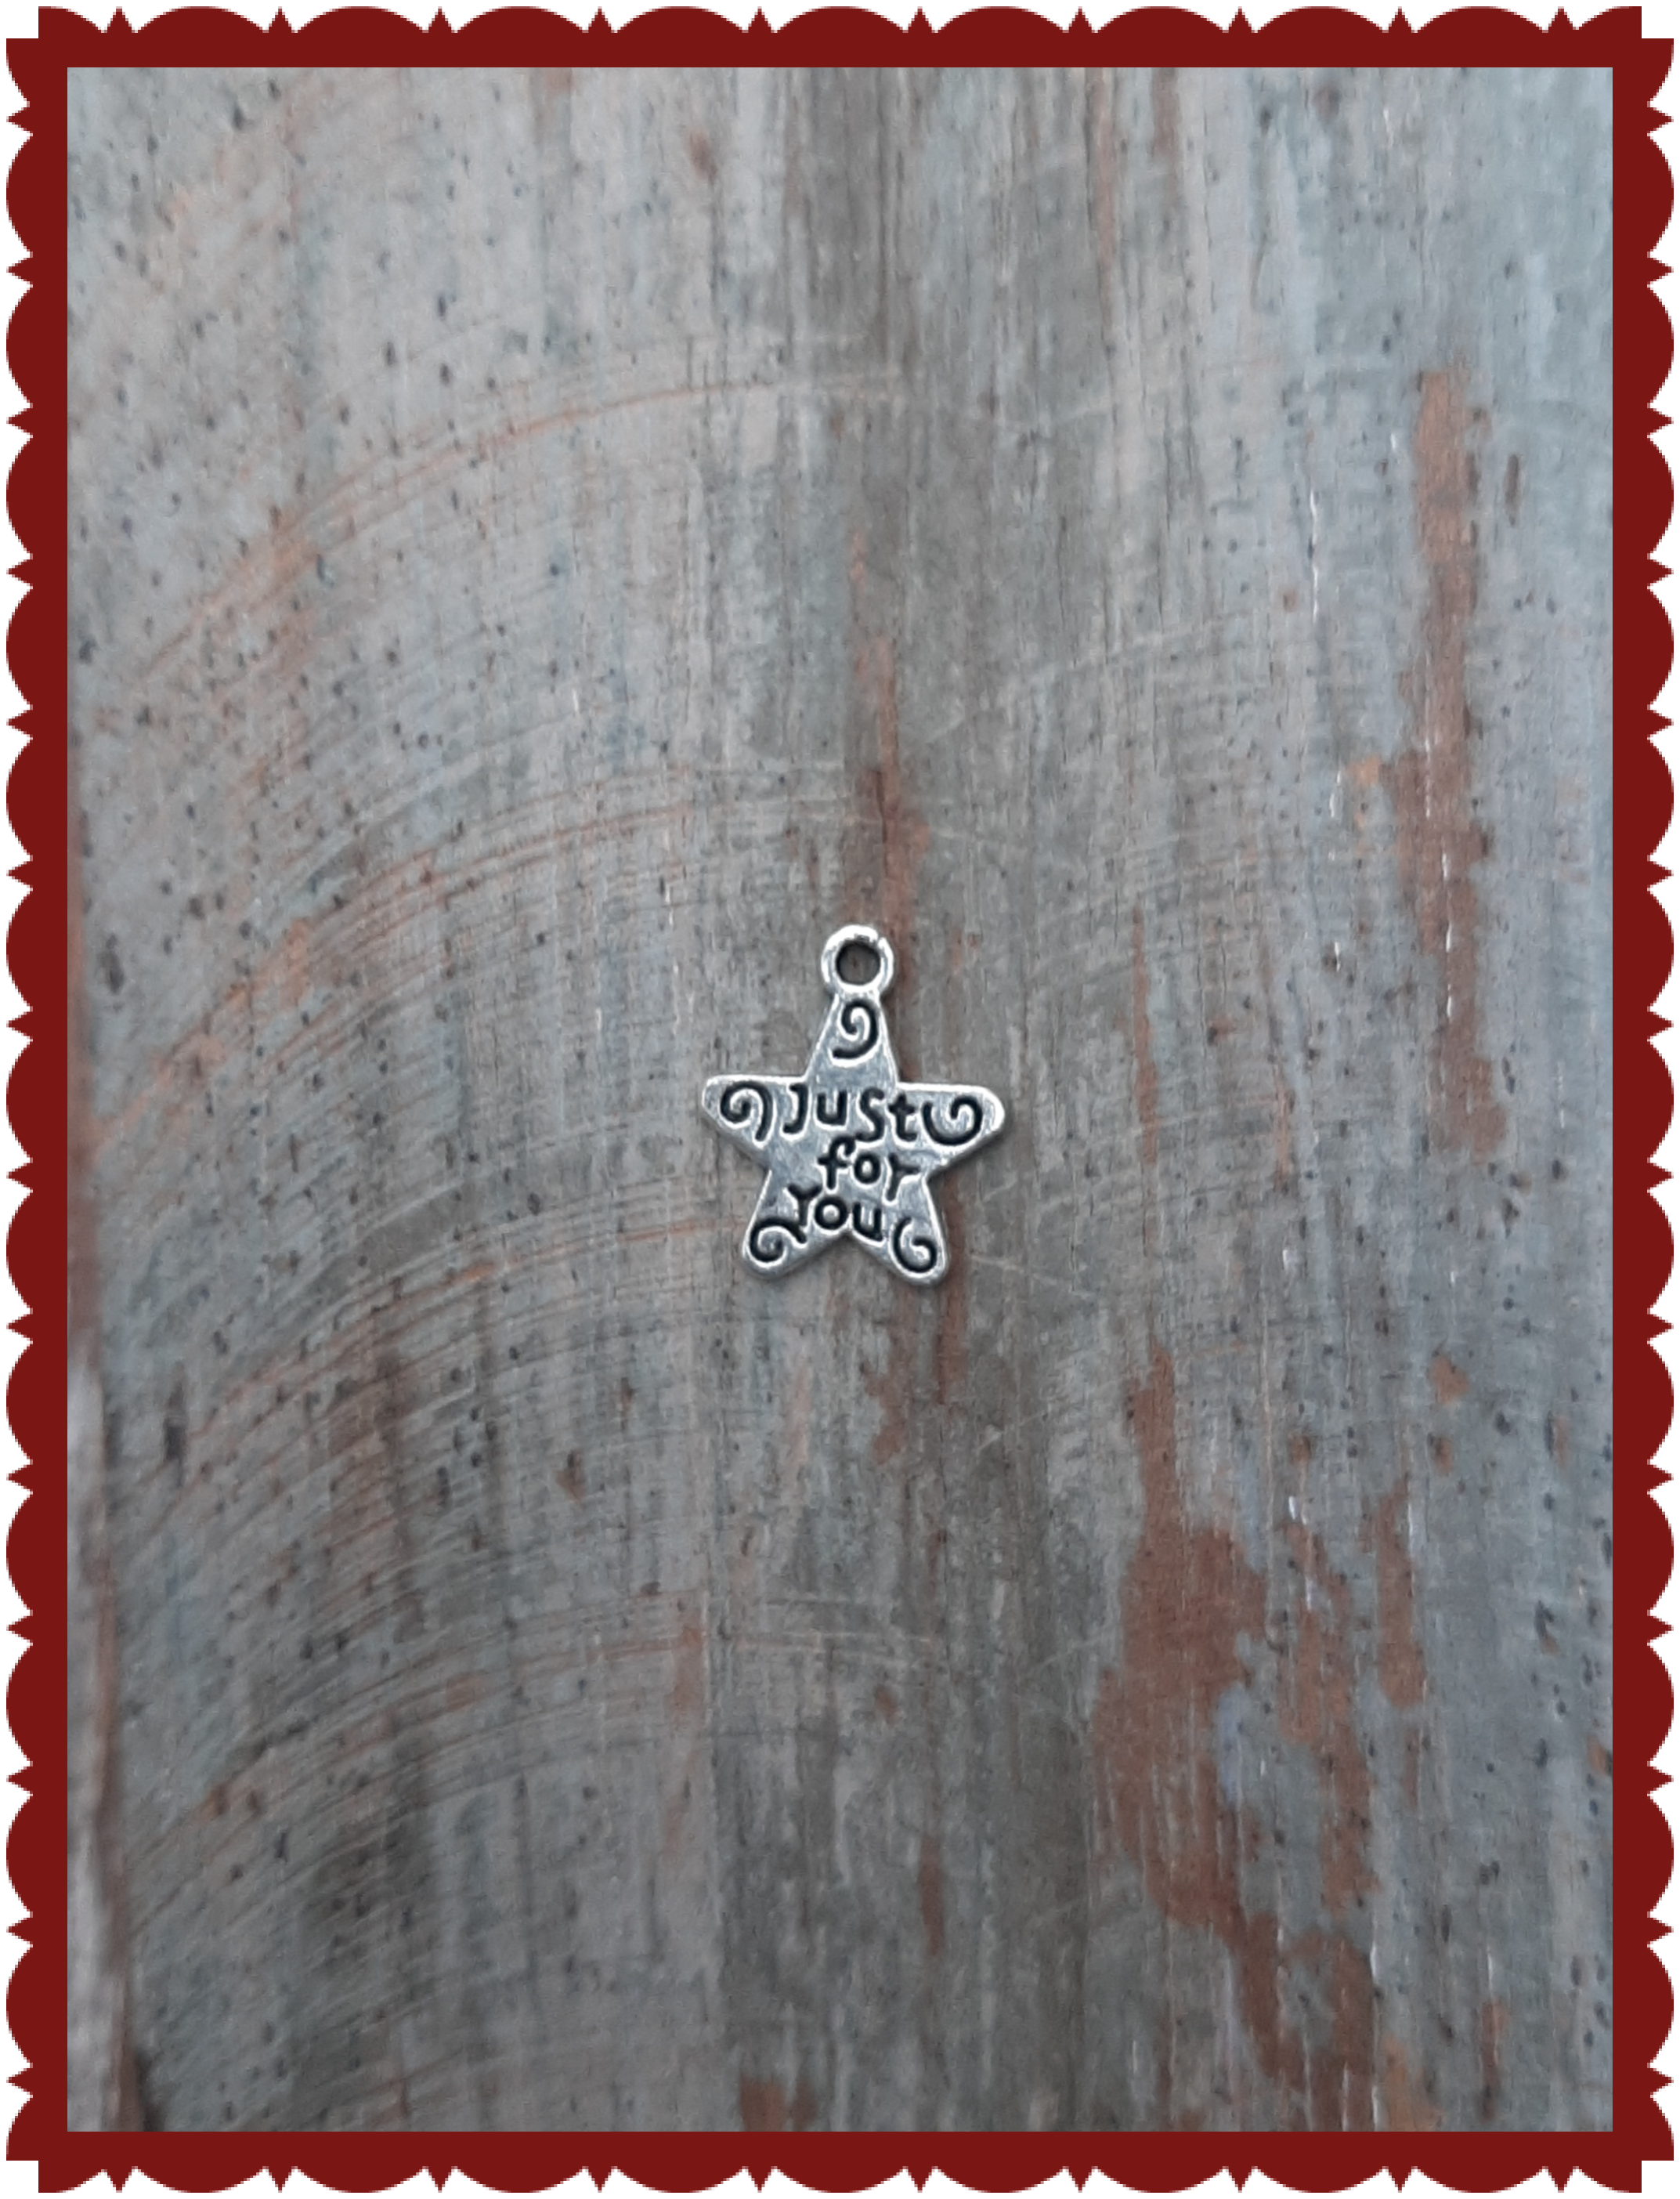 Charm asterisk "Just for you"